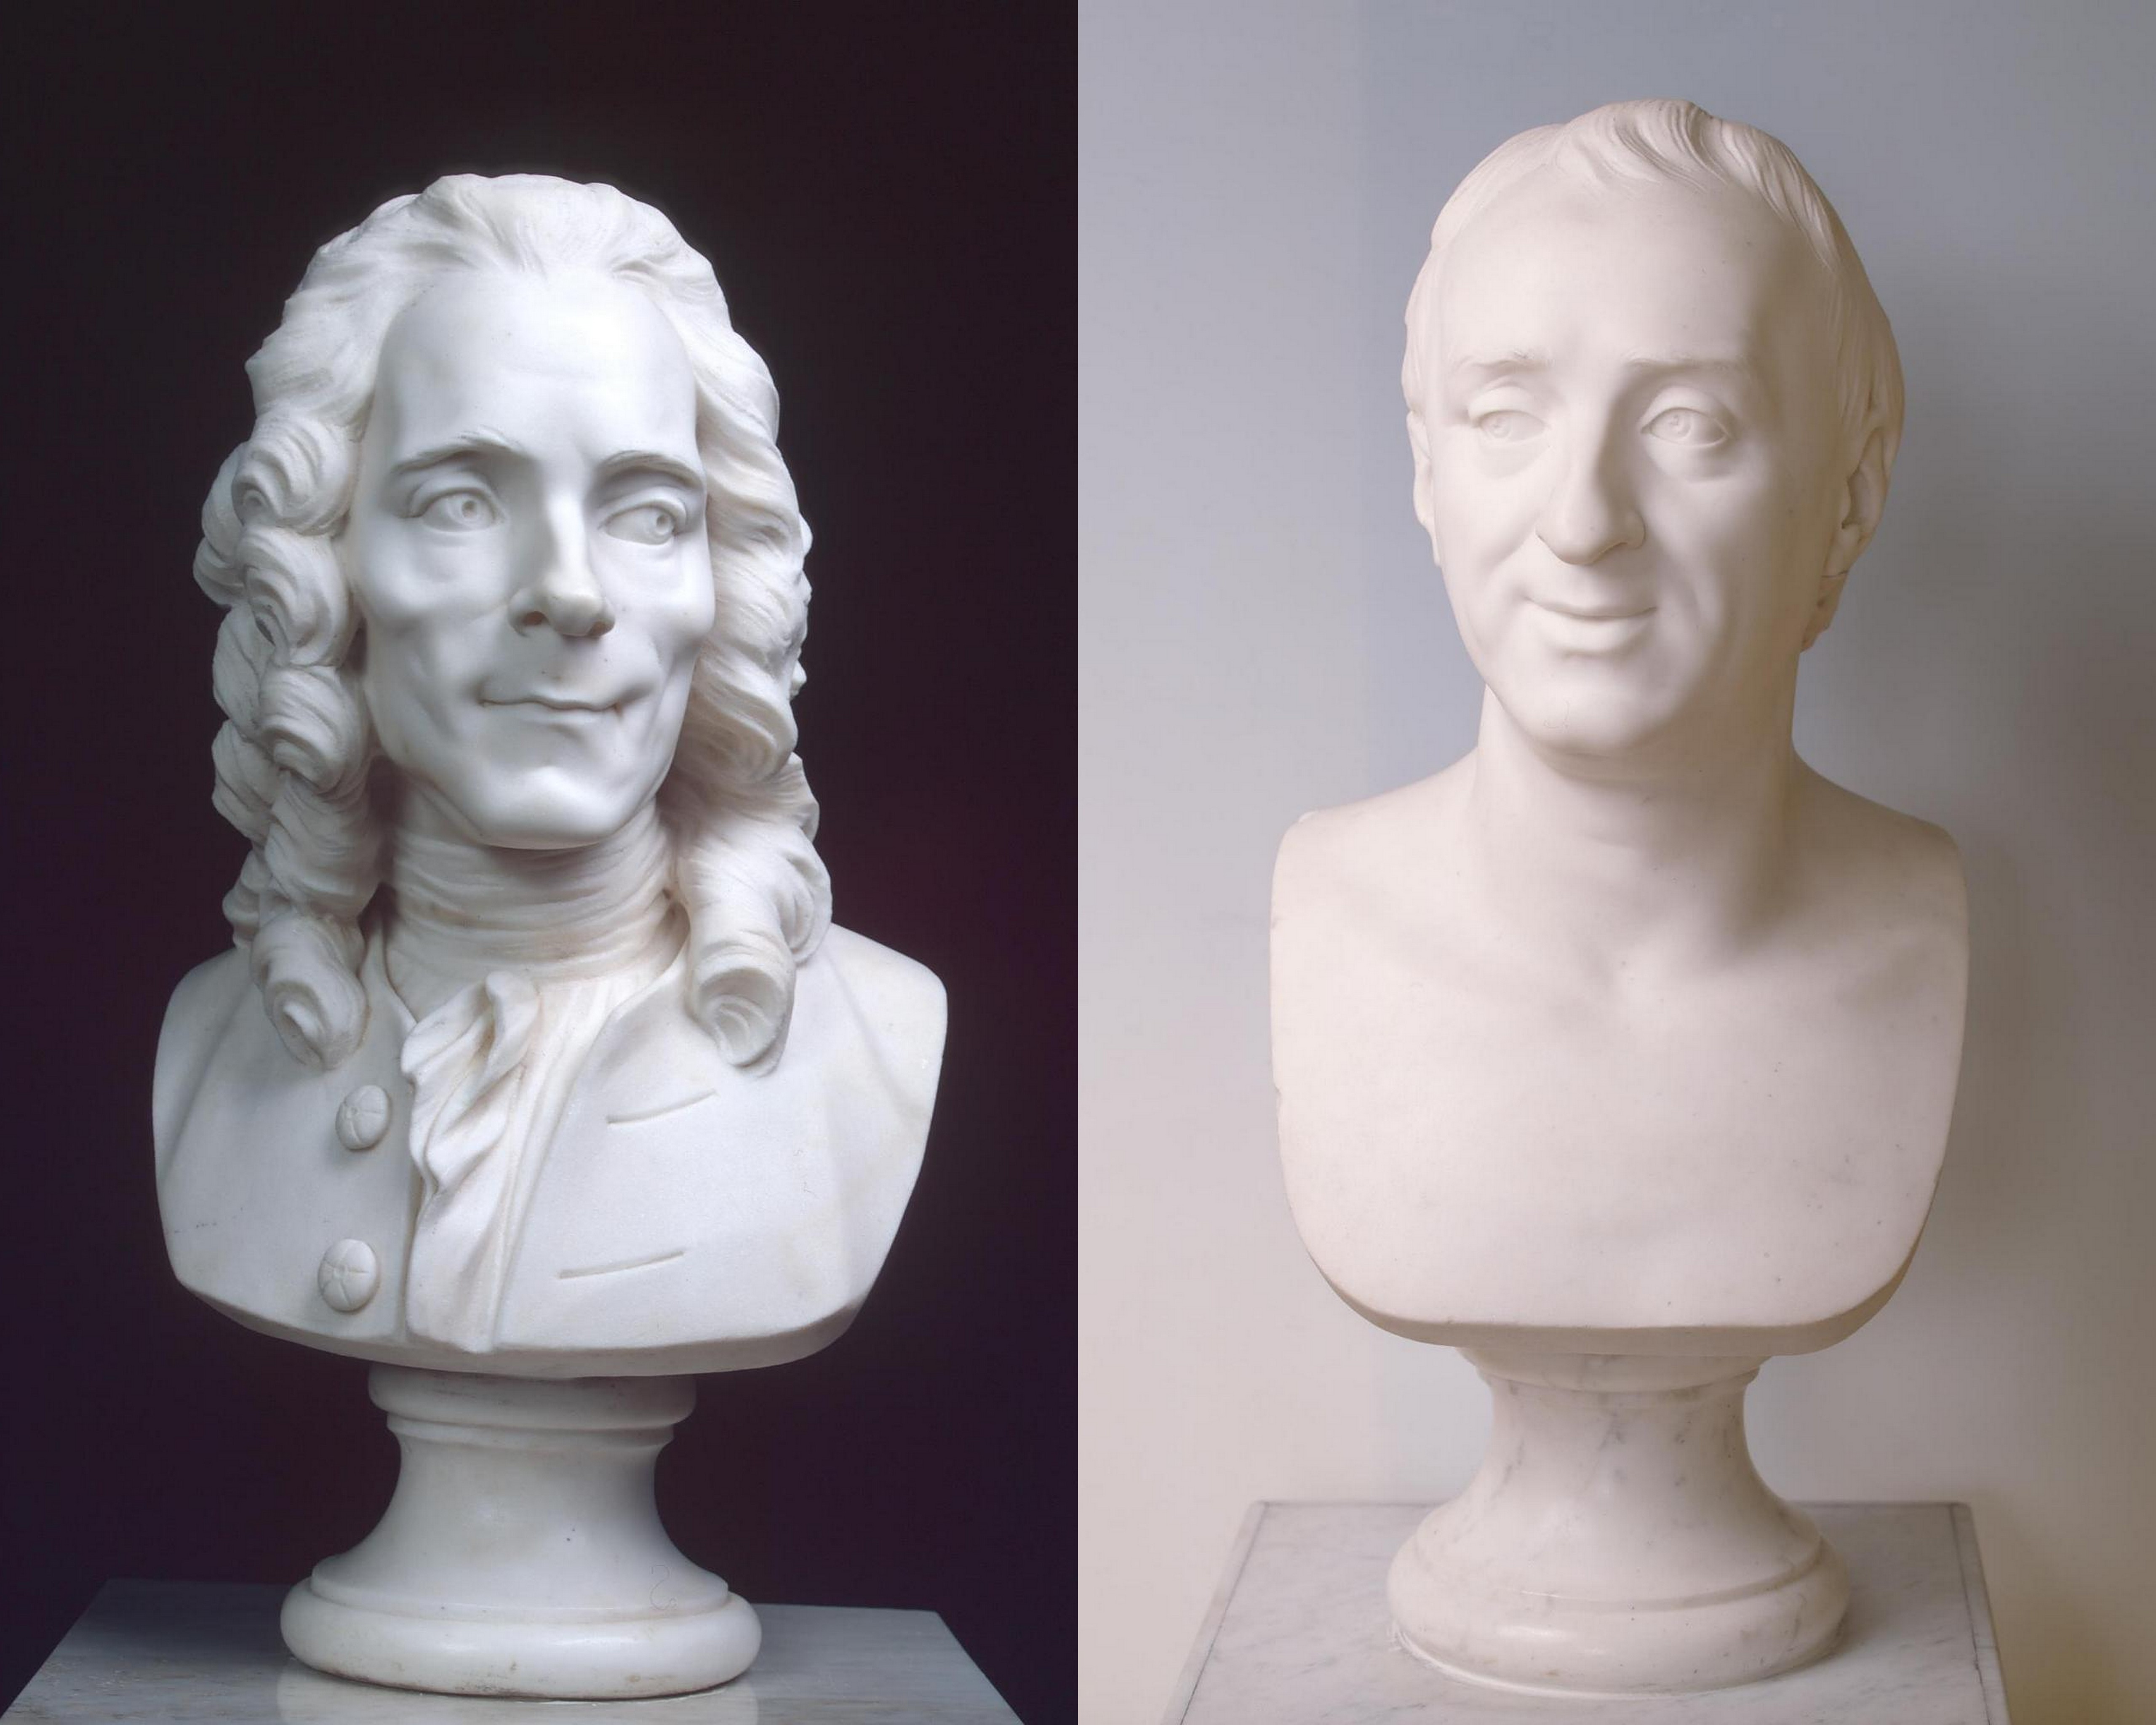 Left | Marie-Anne Collot, Voltaire, France 1770s, State Hermitage Museum - Right |  Marie-Anne Collot, Denis Diderot, France, 1772, Hermitage Museum.